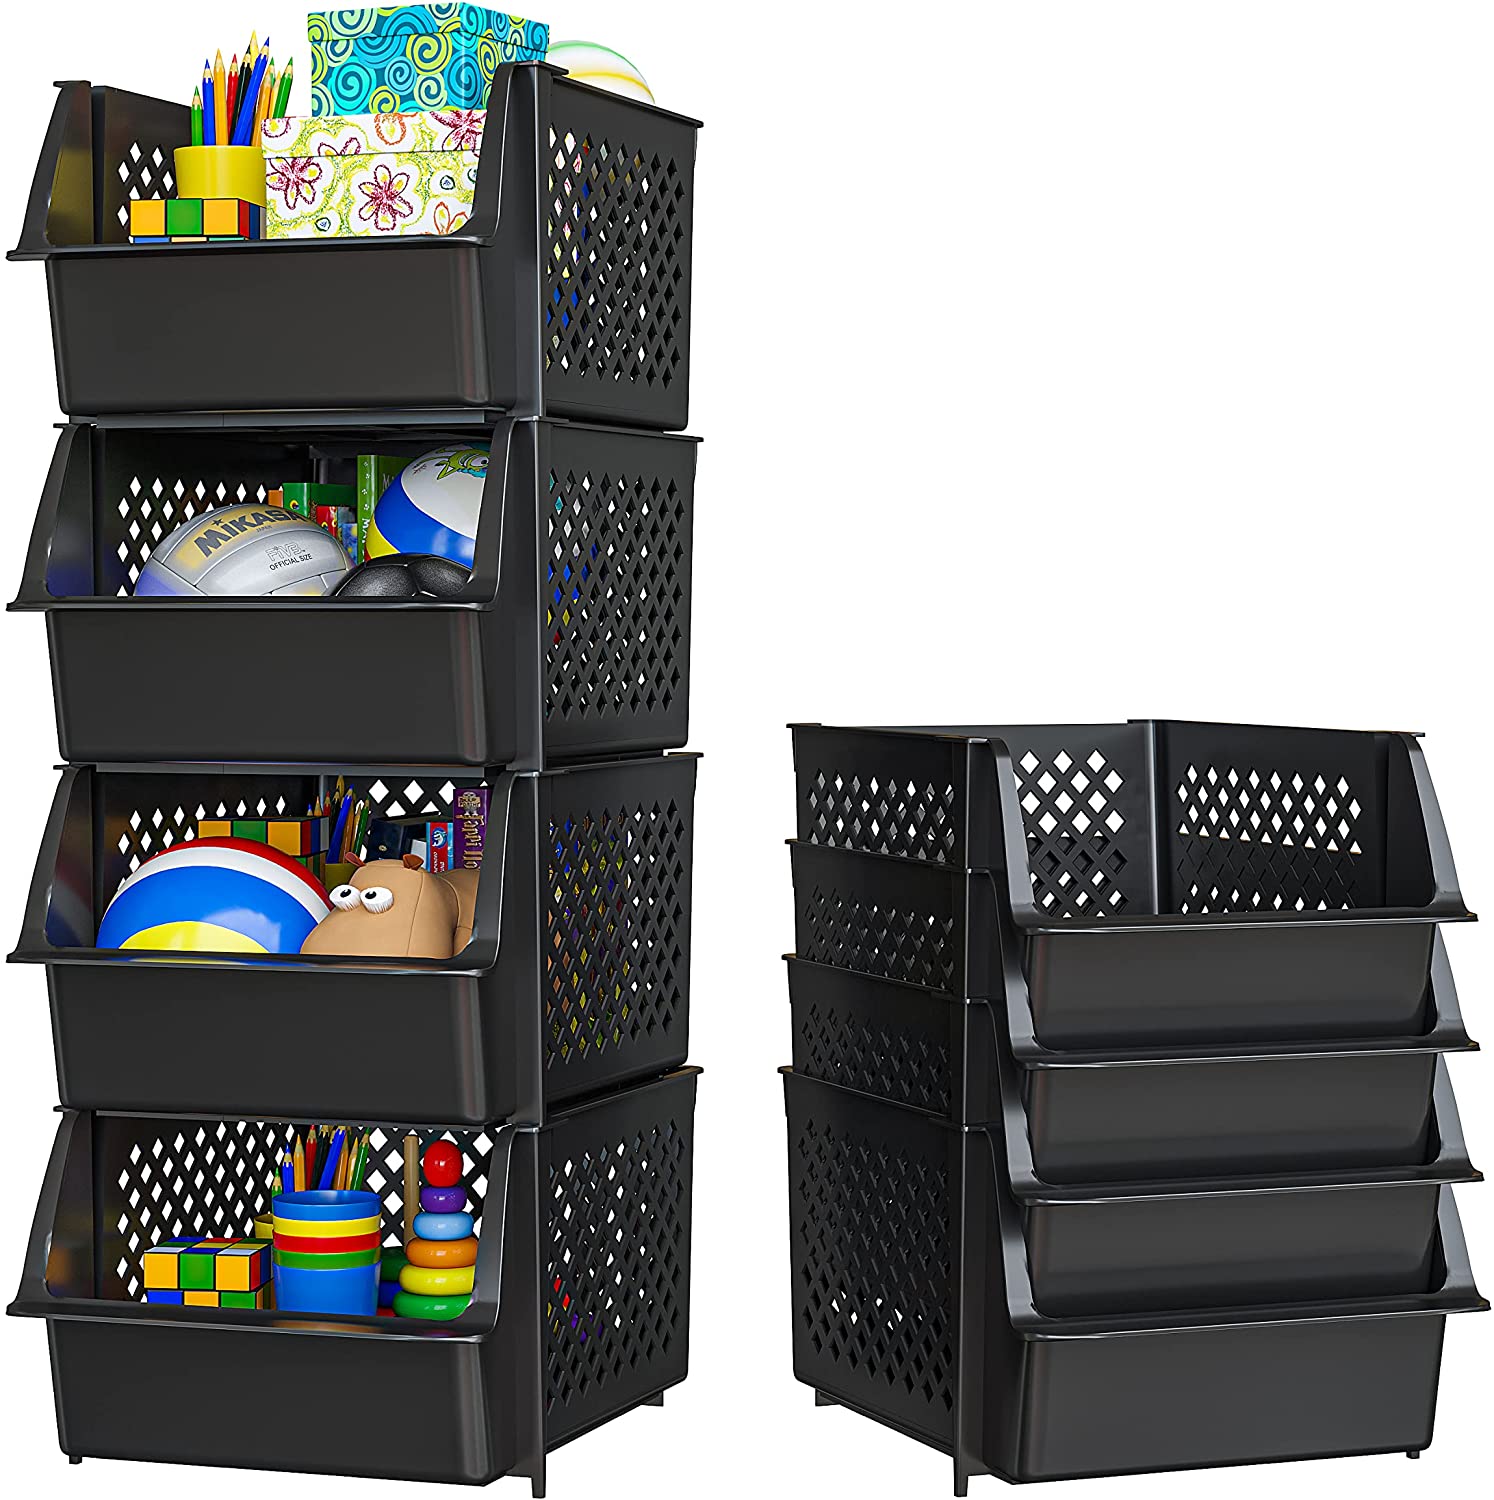 Skywin Plastic Stackable Storage Bins for Pantry - 2 Pack Stackable Bins for Organizing Food, Kitchen, and Bathroom Essentials (Black)